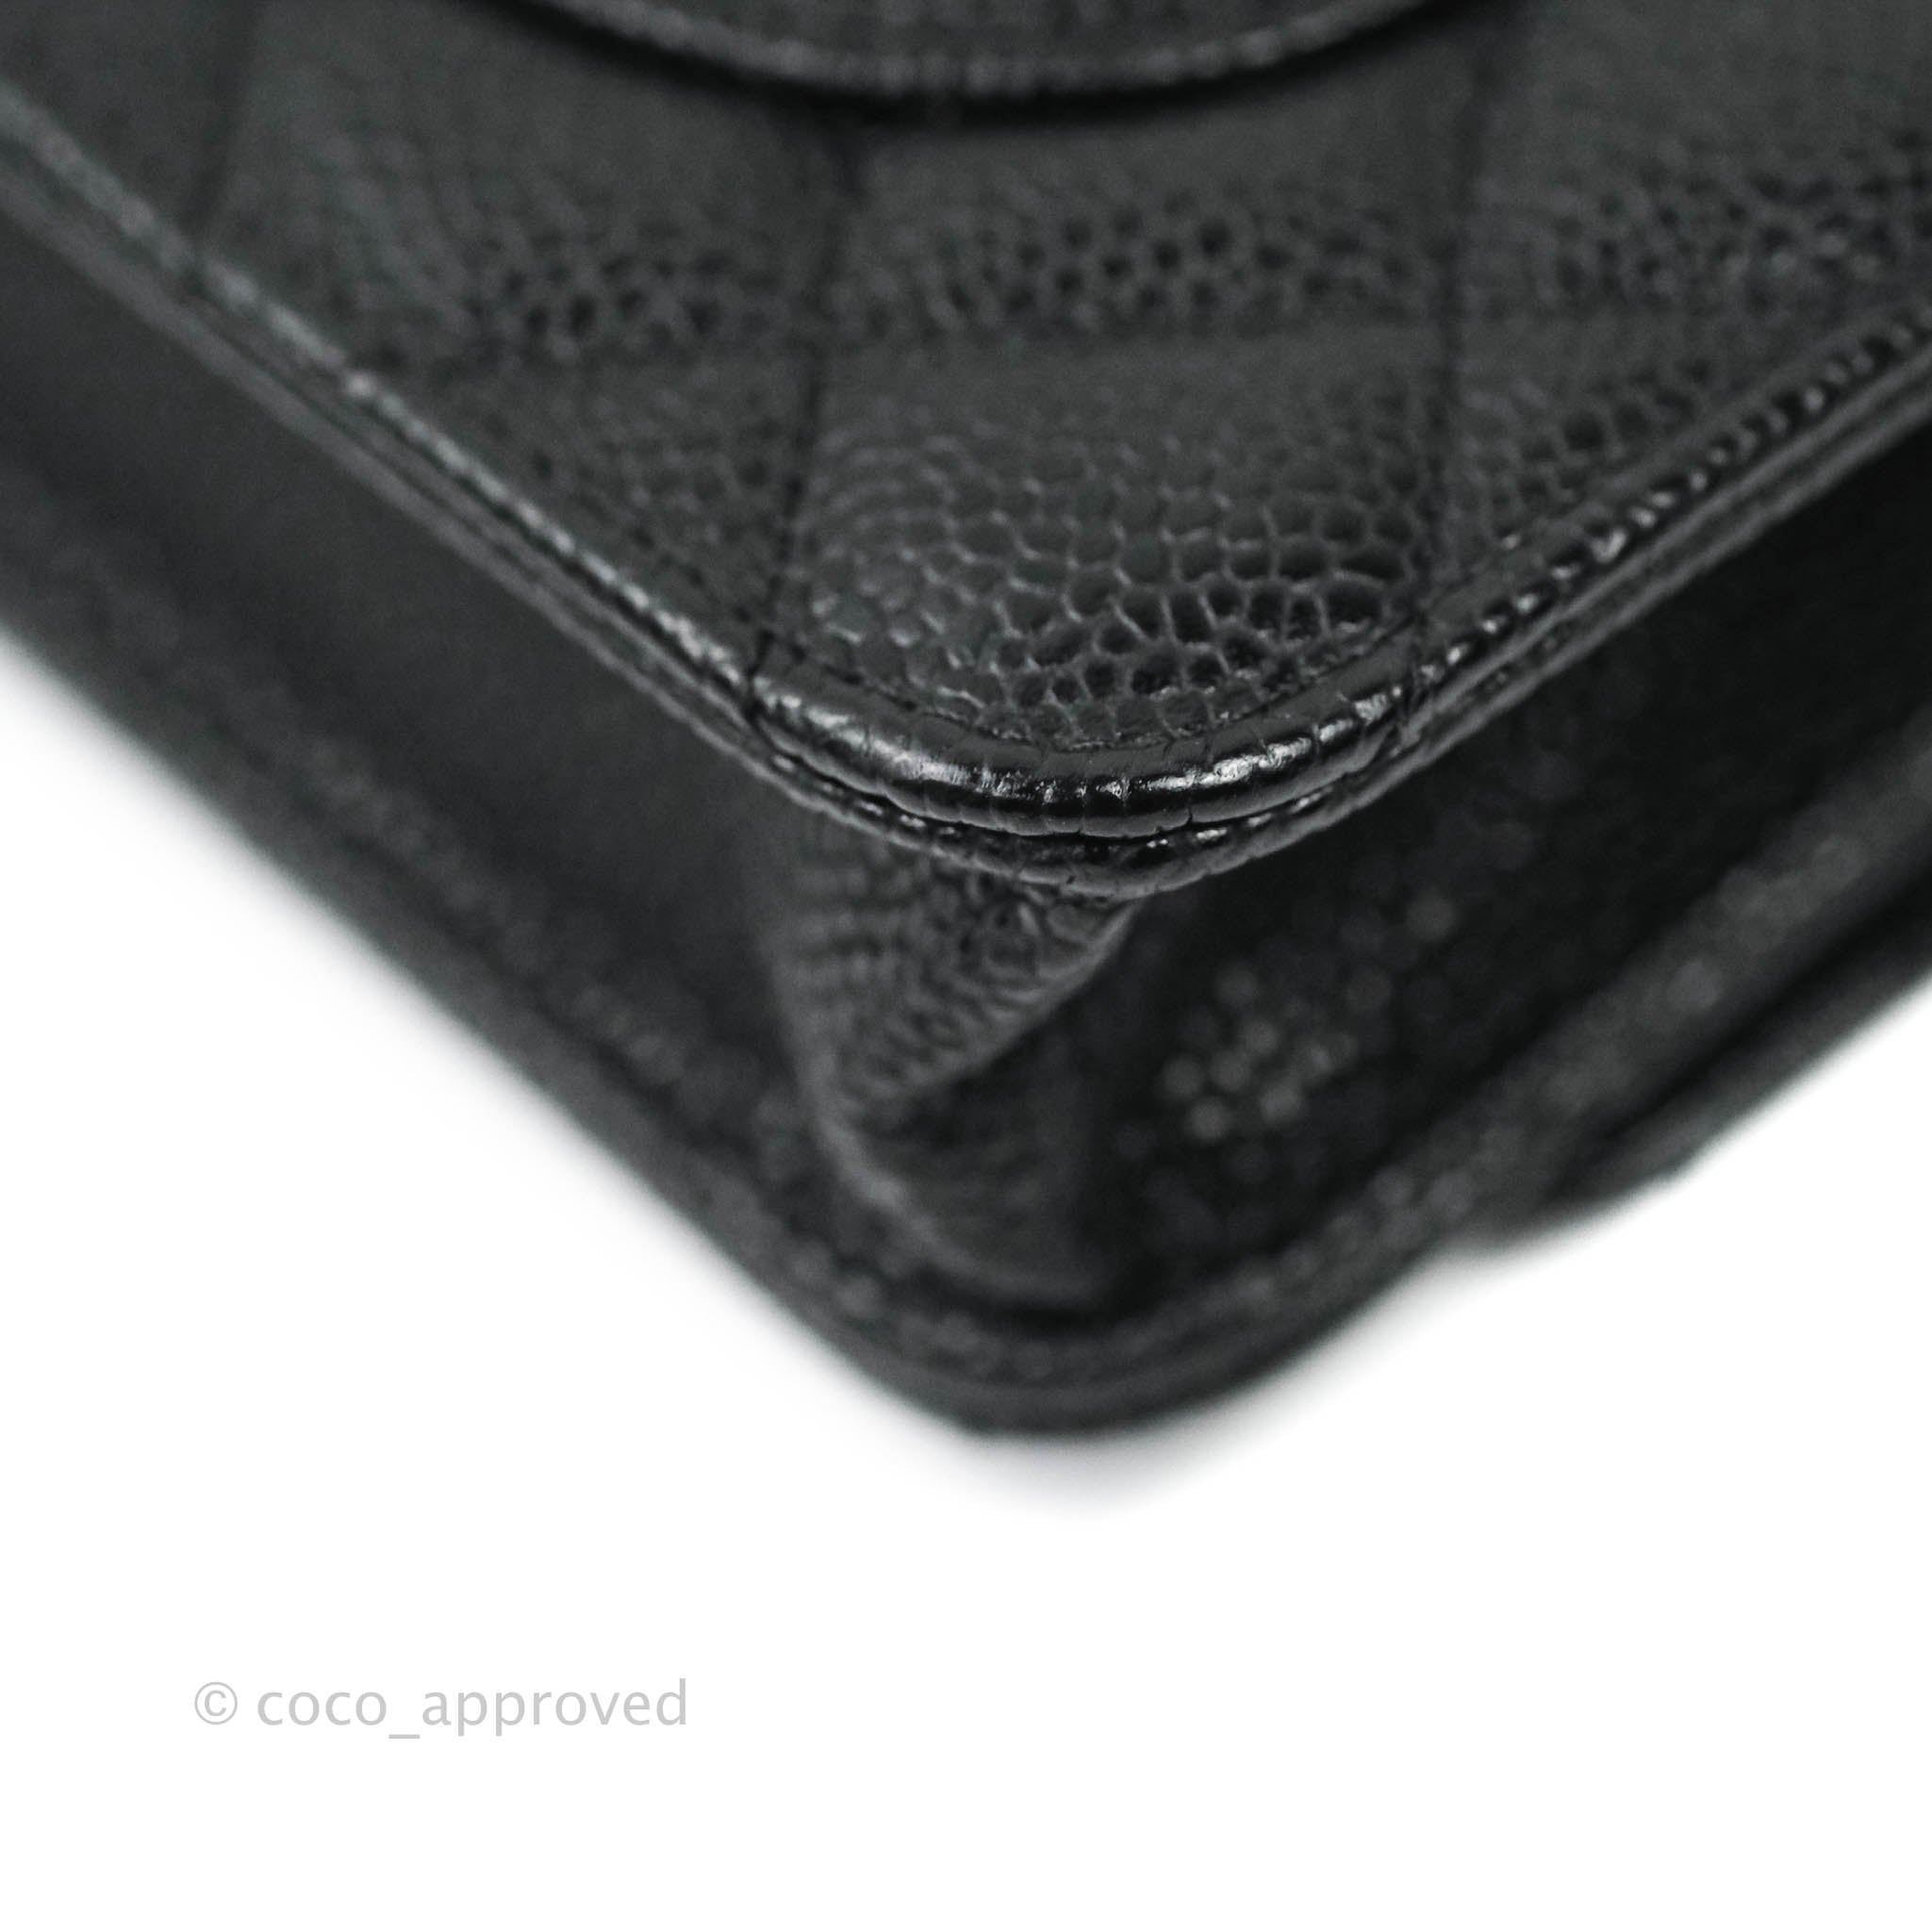 Chanel Black Quilted Caviar Wallet on Chain WOC